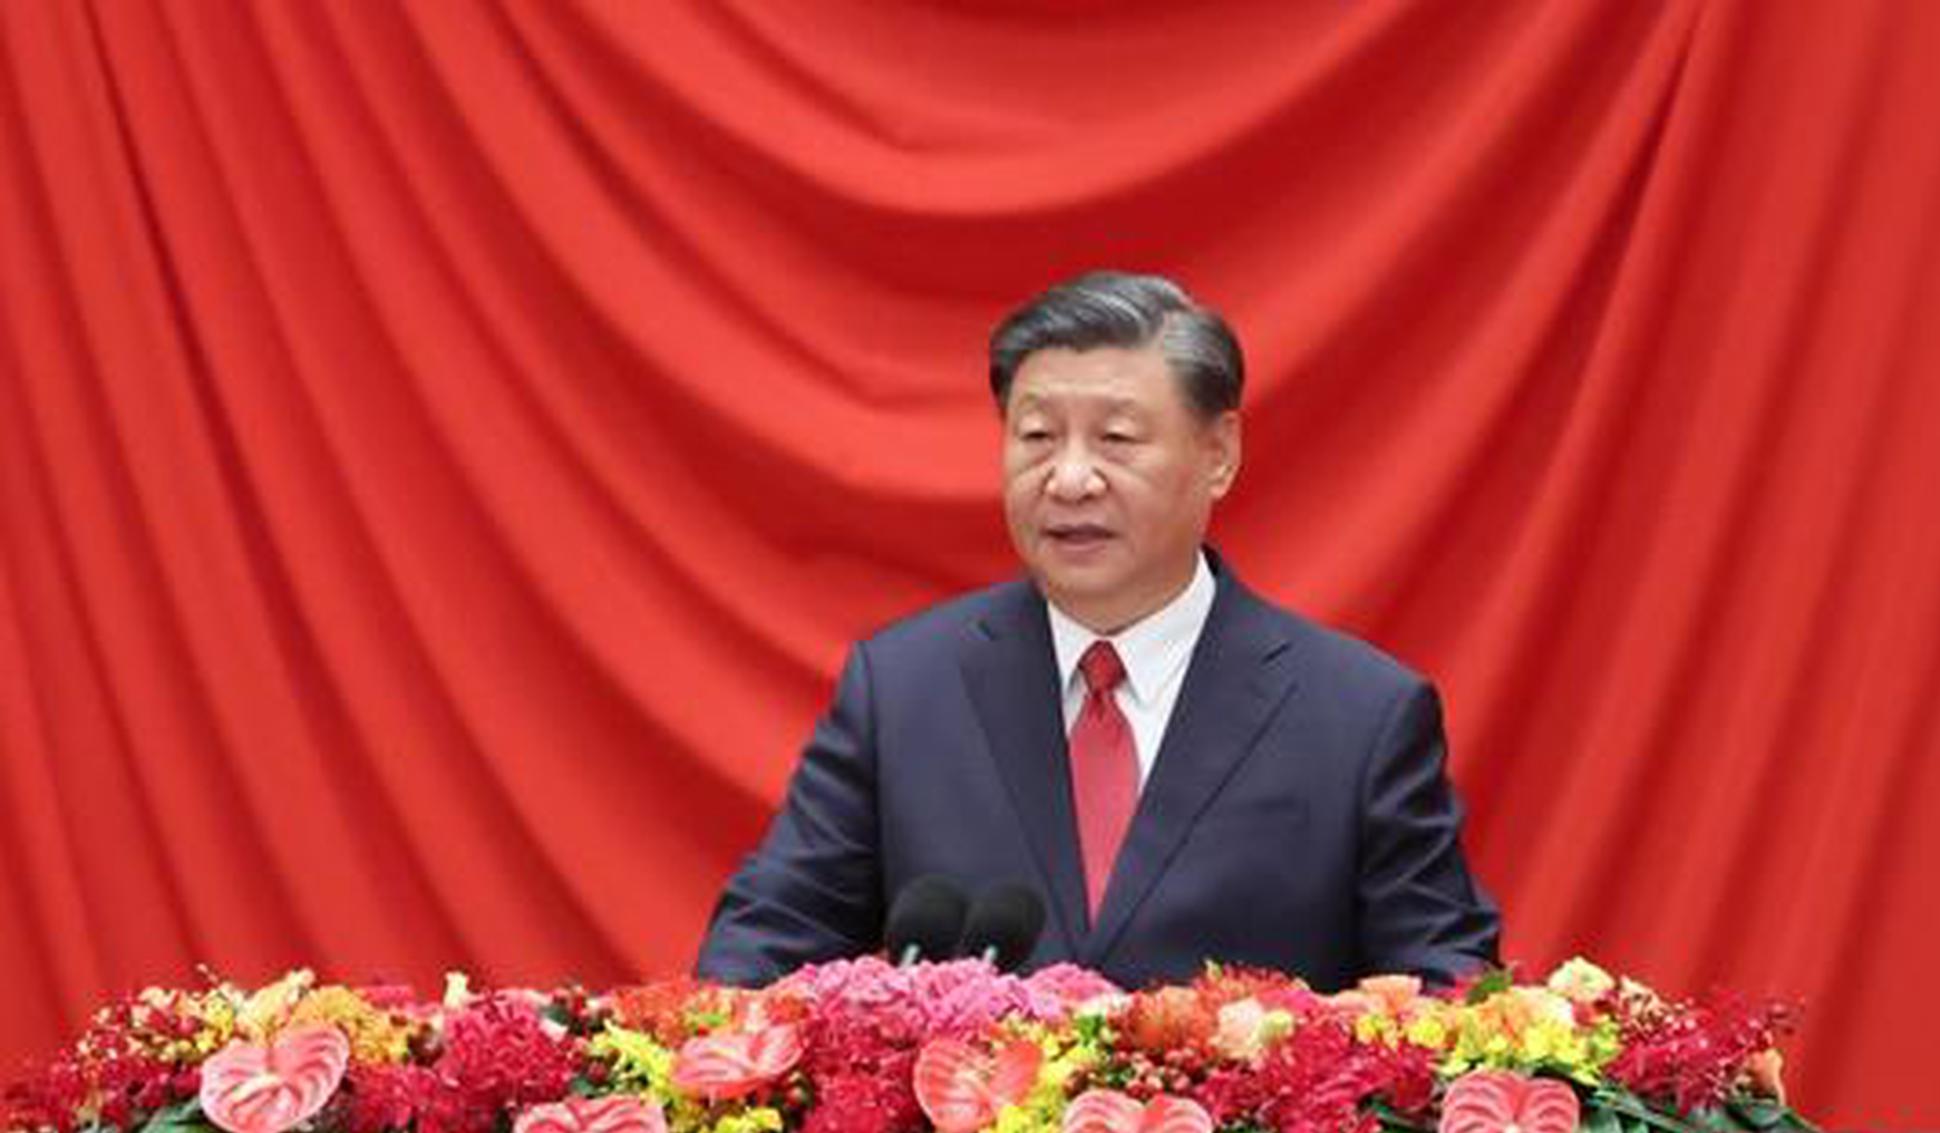 Xi addresses reception to celebrate 74th founding anniversary of the PRC